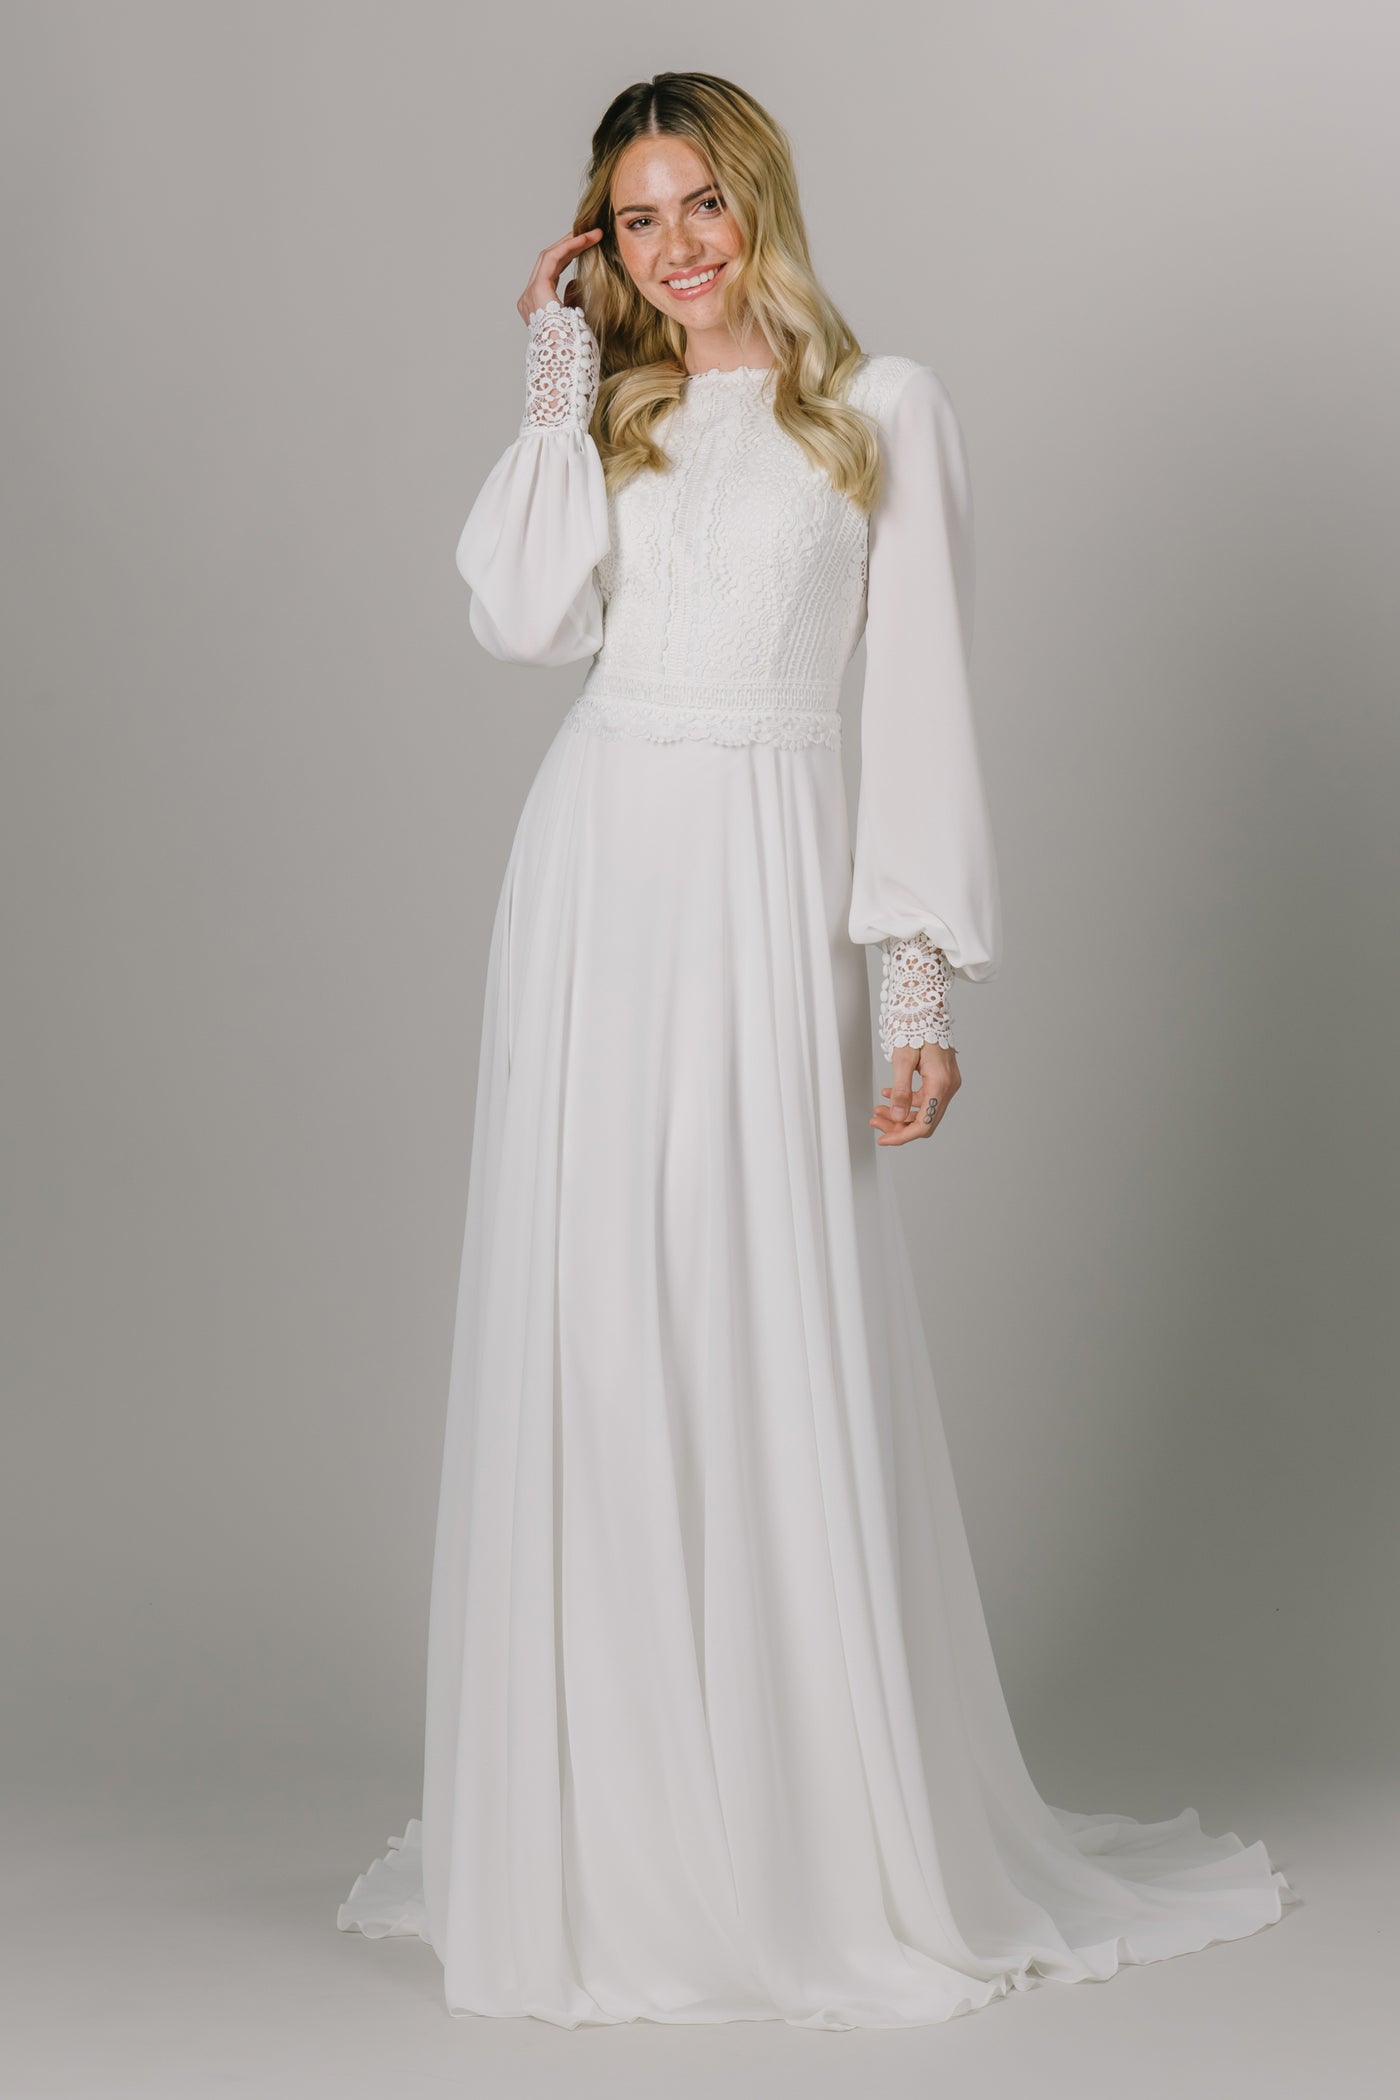 This Modest Wedding Dress features bishop sleeves, a lace bodice and A-line skirt. - Modest Wedding Dresses - Modest Dresses - Modest Clothing - LatterDayBride